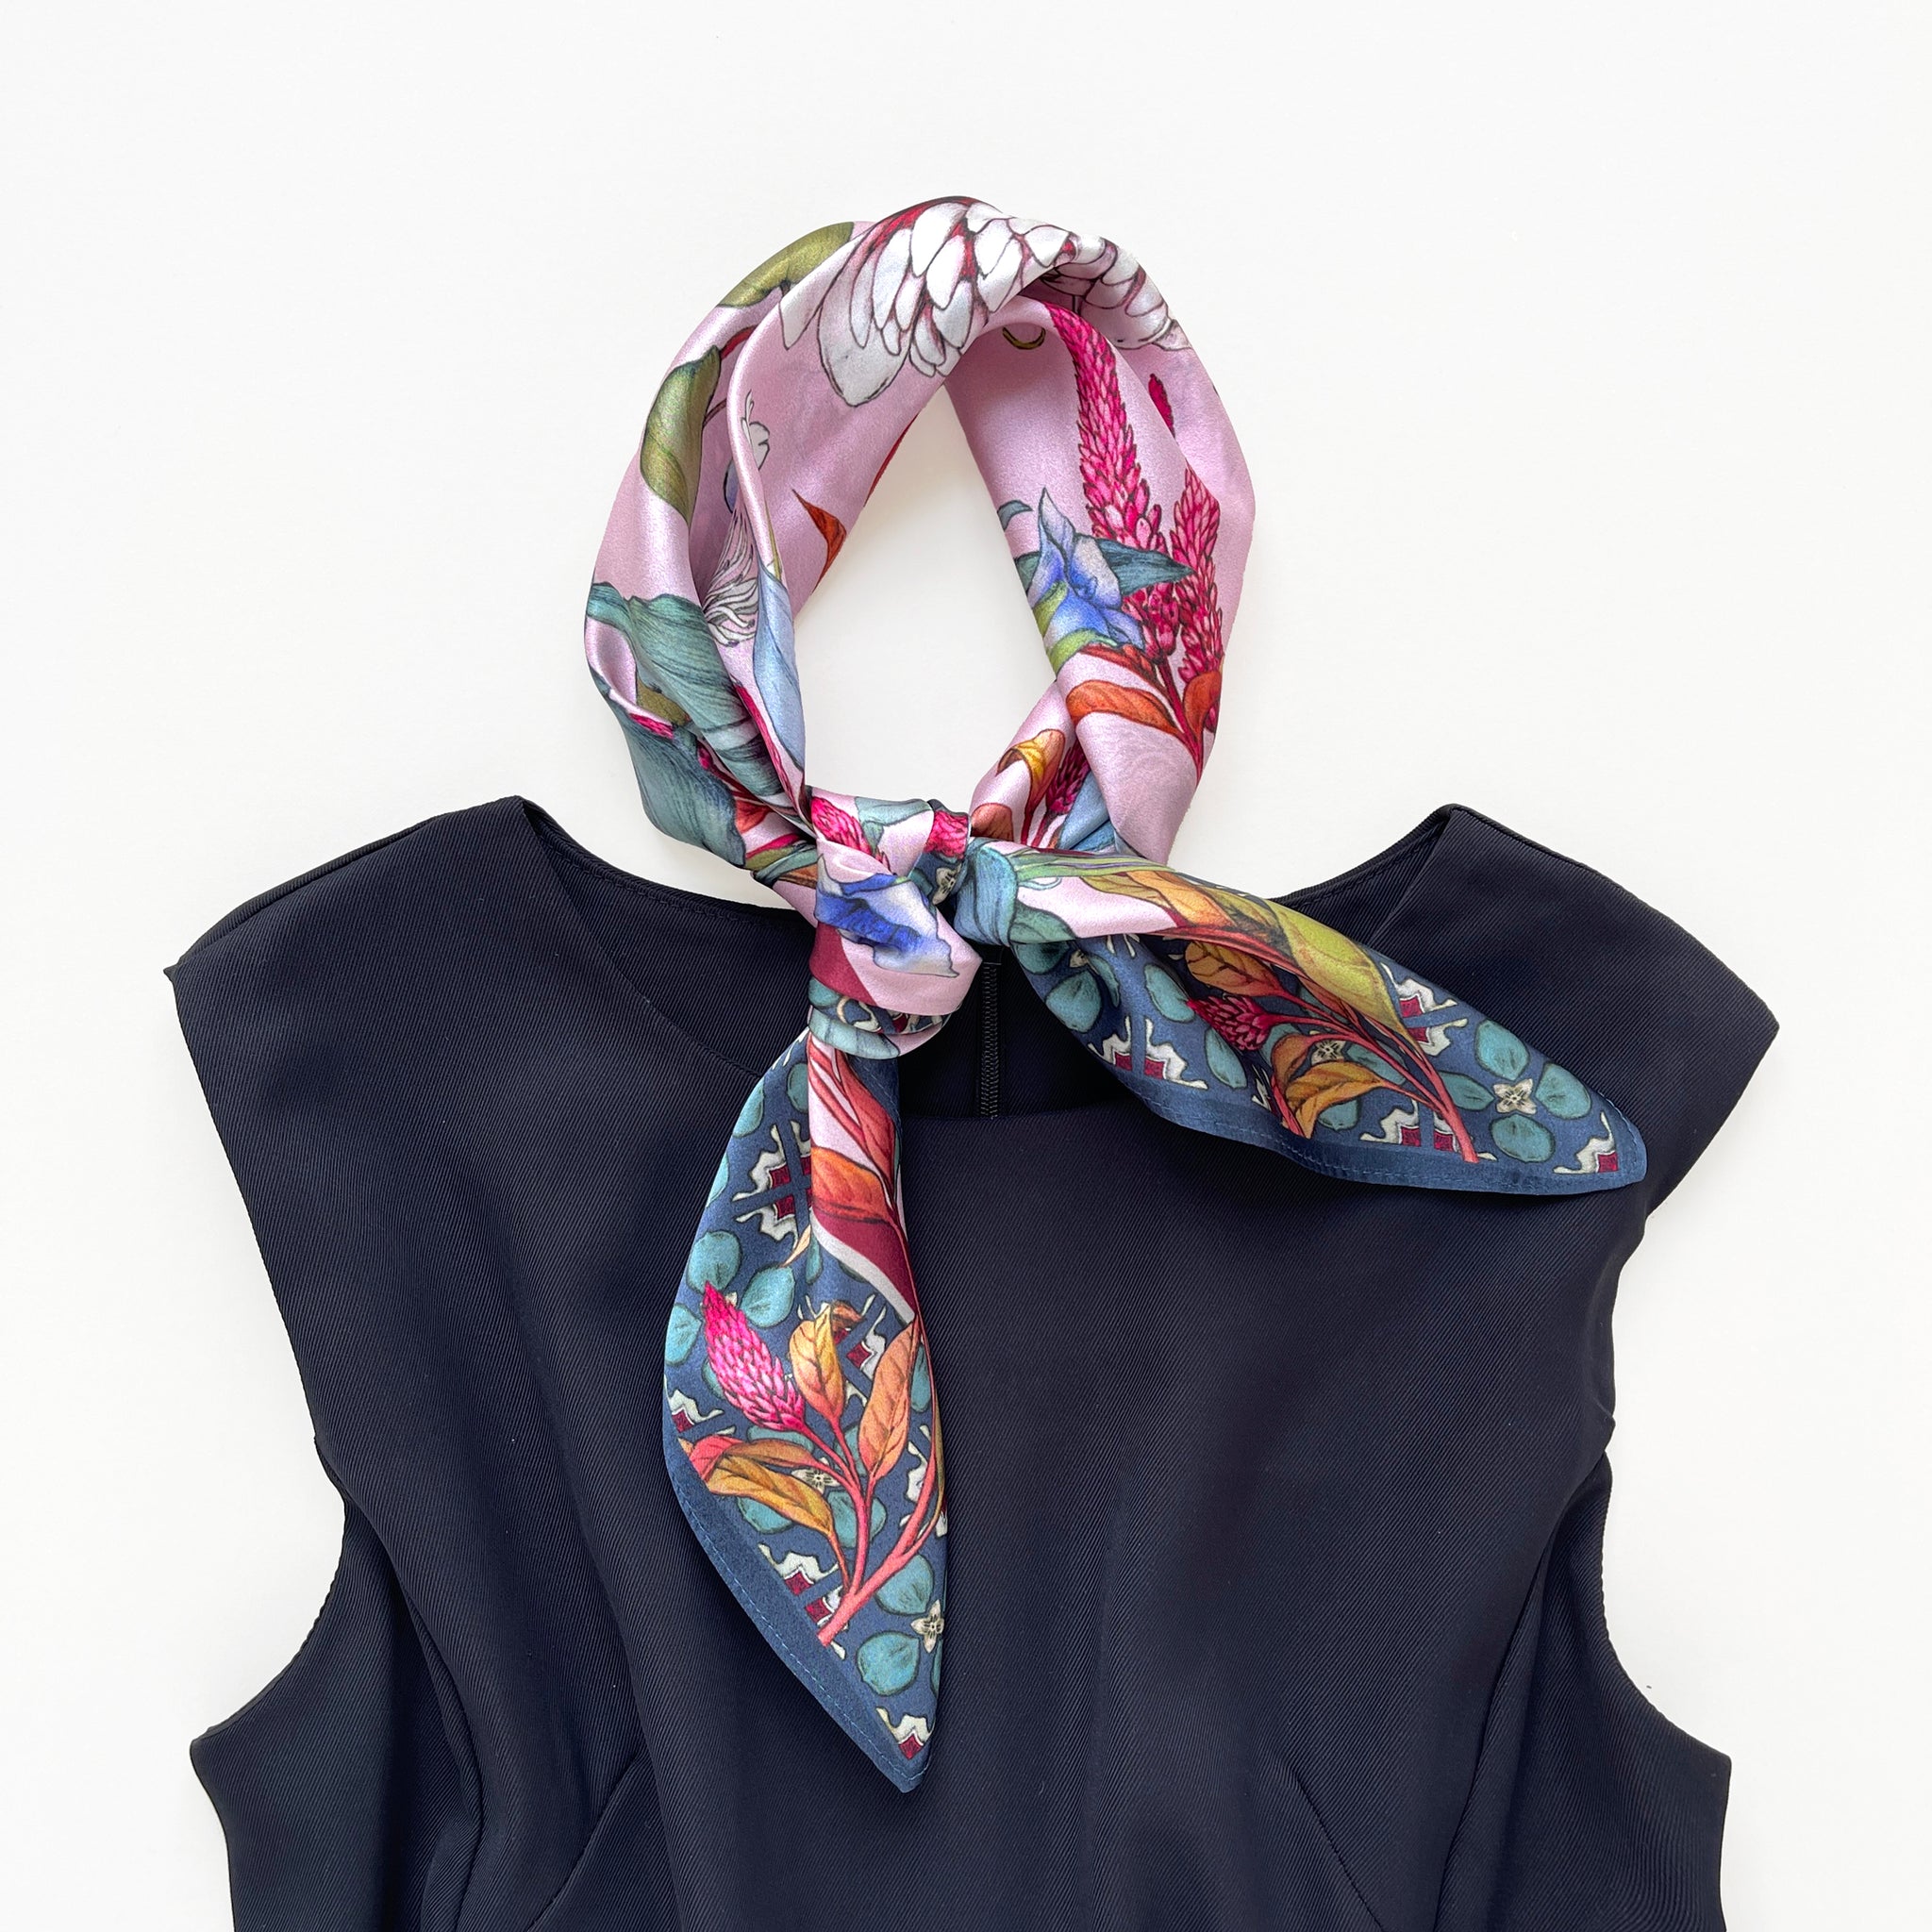 a pink base silk scarf featuring botanic floral print, knotted as a neck scarf, paired with a black dress